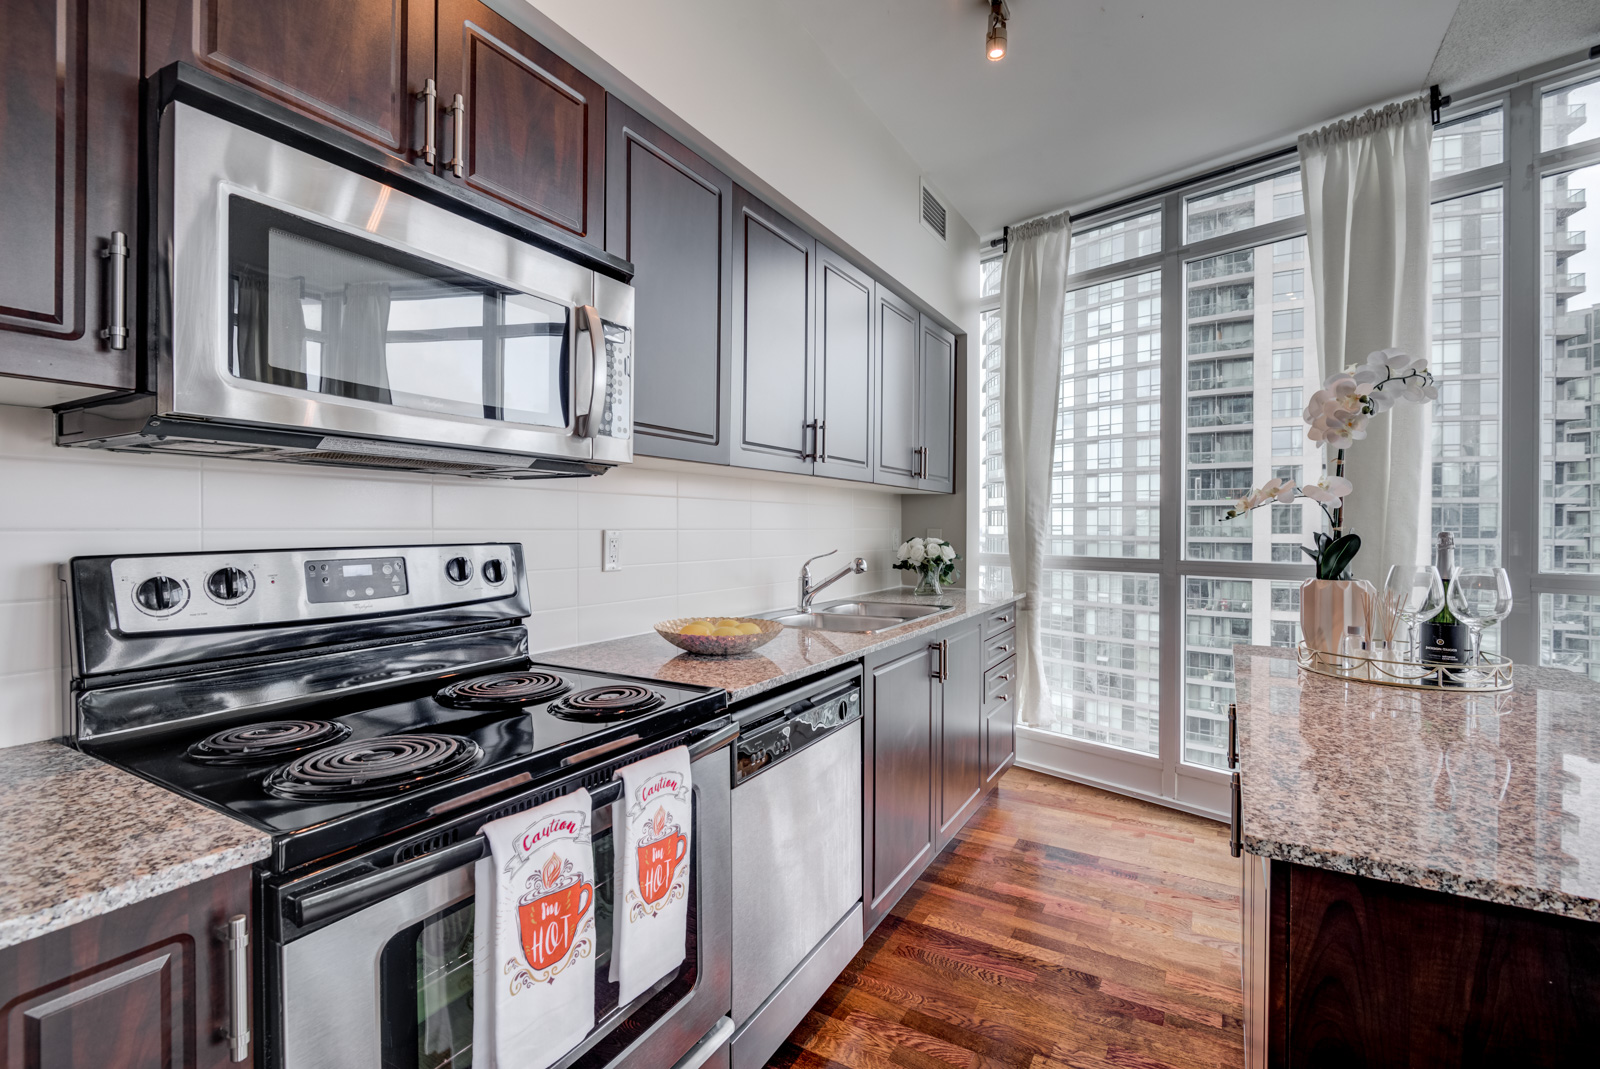 Linear kitchen and stainless oven, dishwasher and microwave at 215 Fort York Blvd Unit 2310.